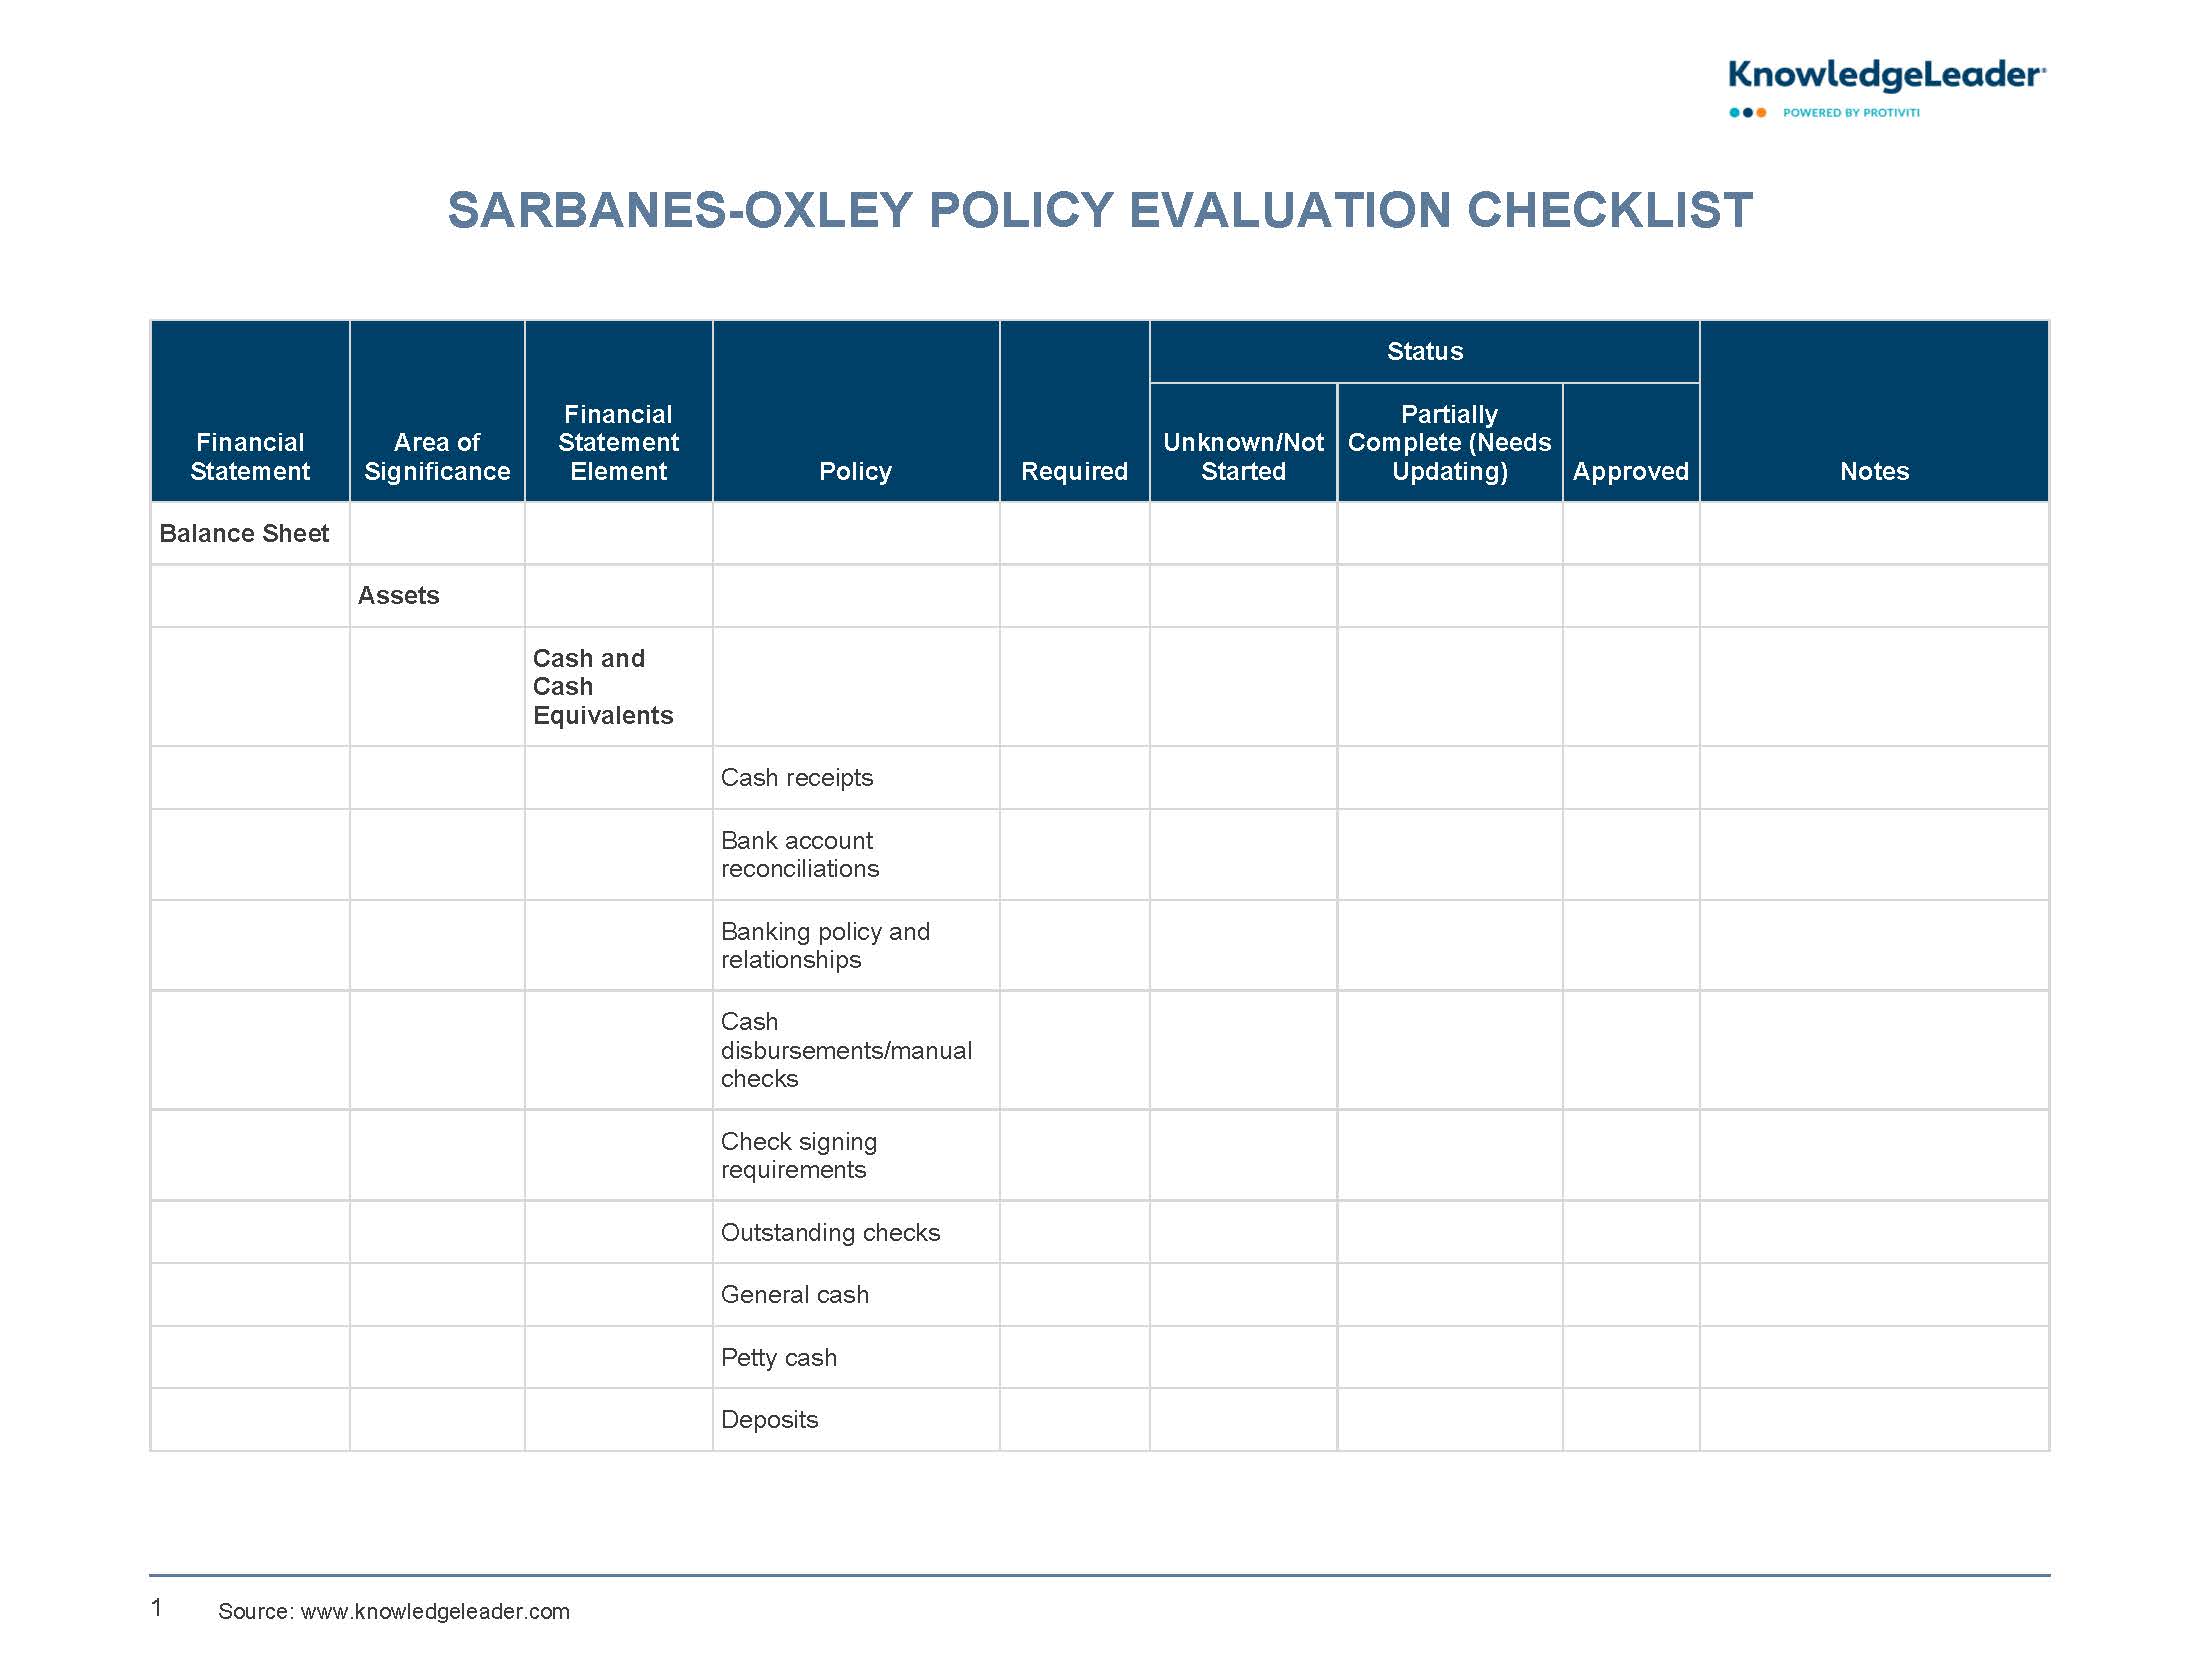 Screenshot of the first page of Sarbanes-Oxley Policy Evaluation Checklist